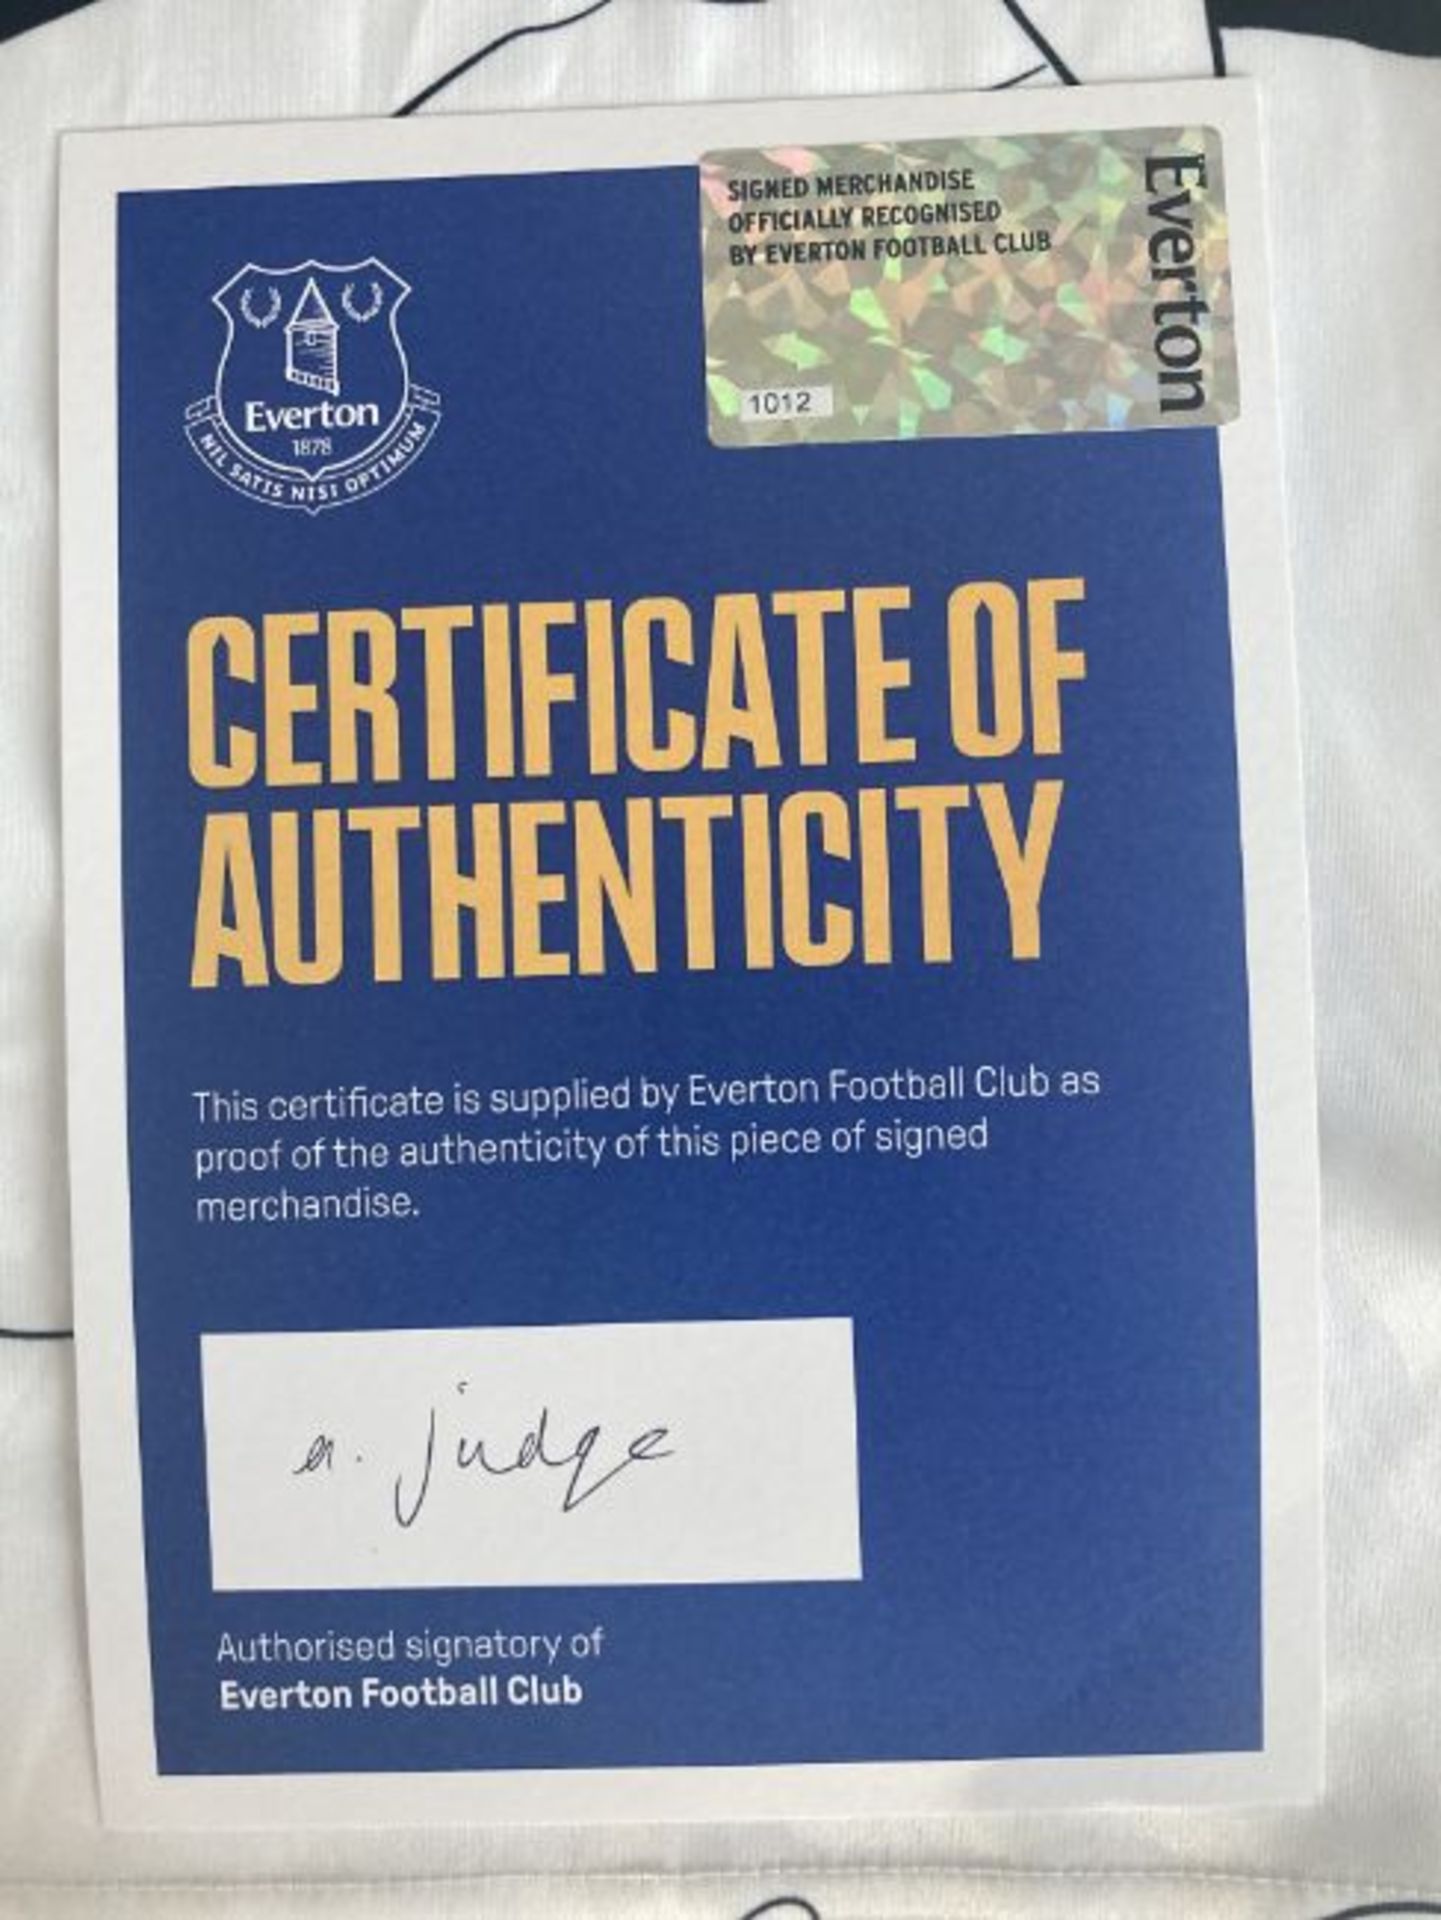 Limited Edition Signed Shirt – Everton Football Club Women’s First Team - Image 2 of 3